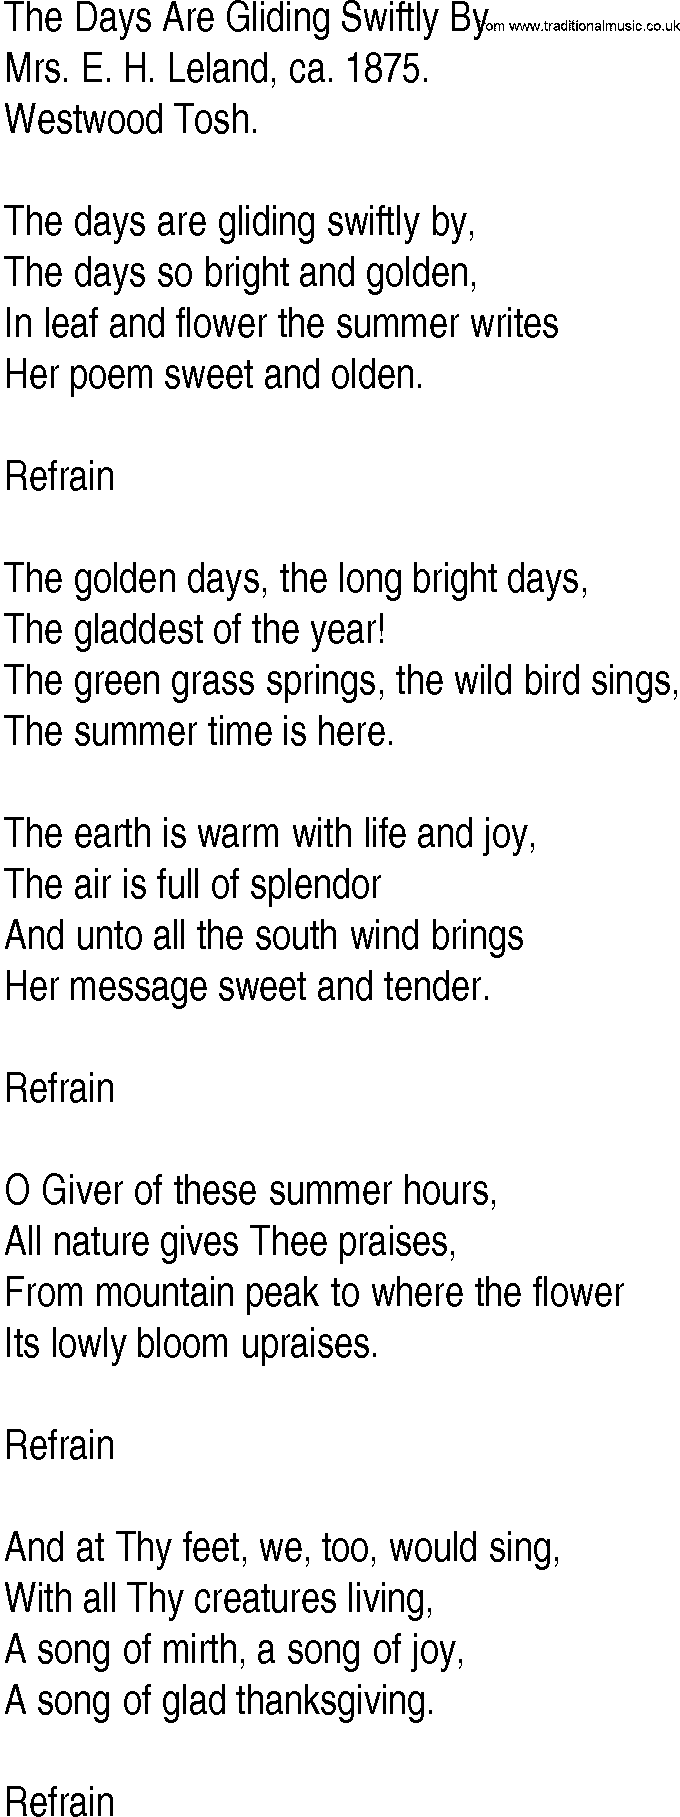 Hymn and Gospel Song: The Days Are Gliding Swiftly By by Mrs E H Leland ca lyrics